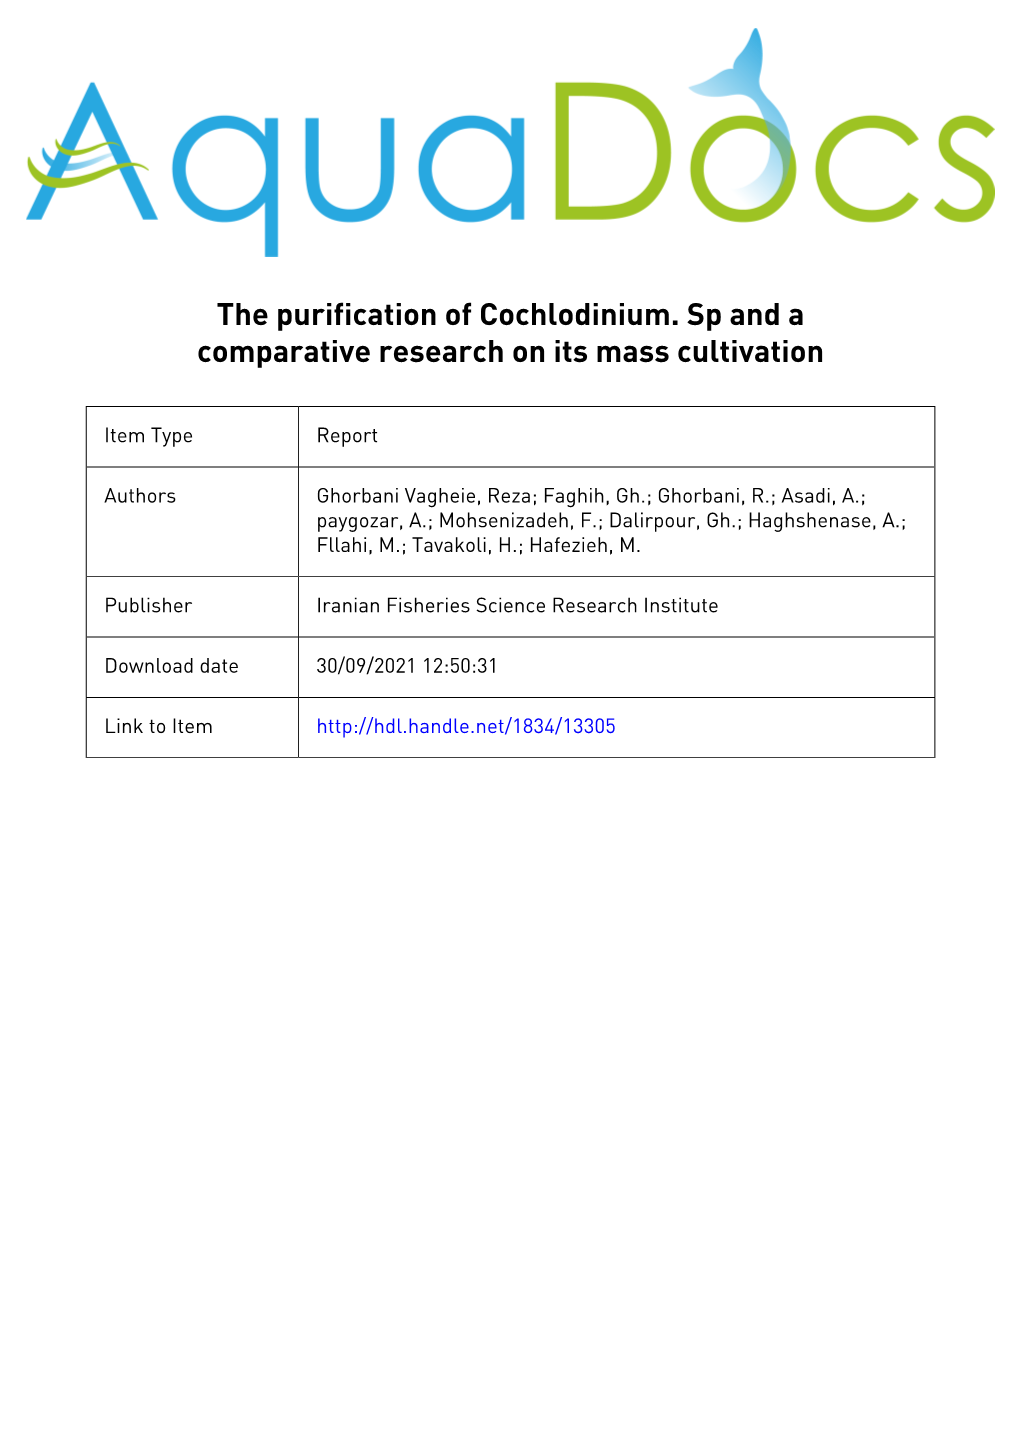 The Purification of Cochlodinium. Sp and a Comparative Research on Its Mass Cultivation